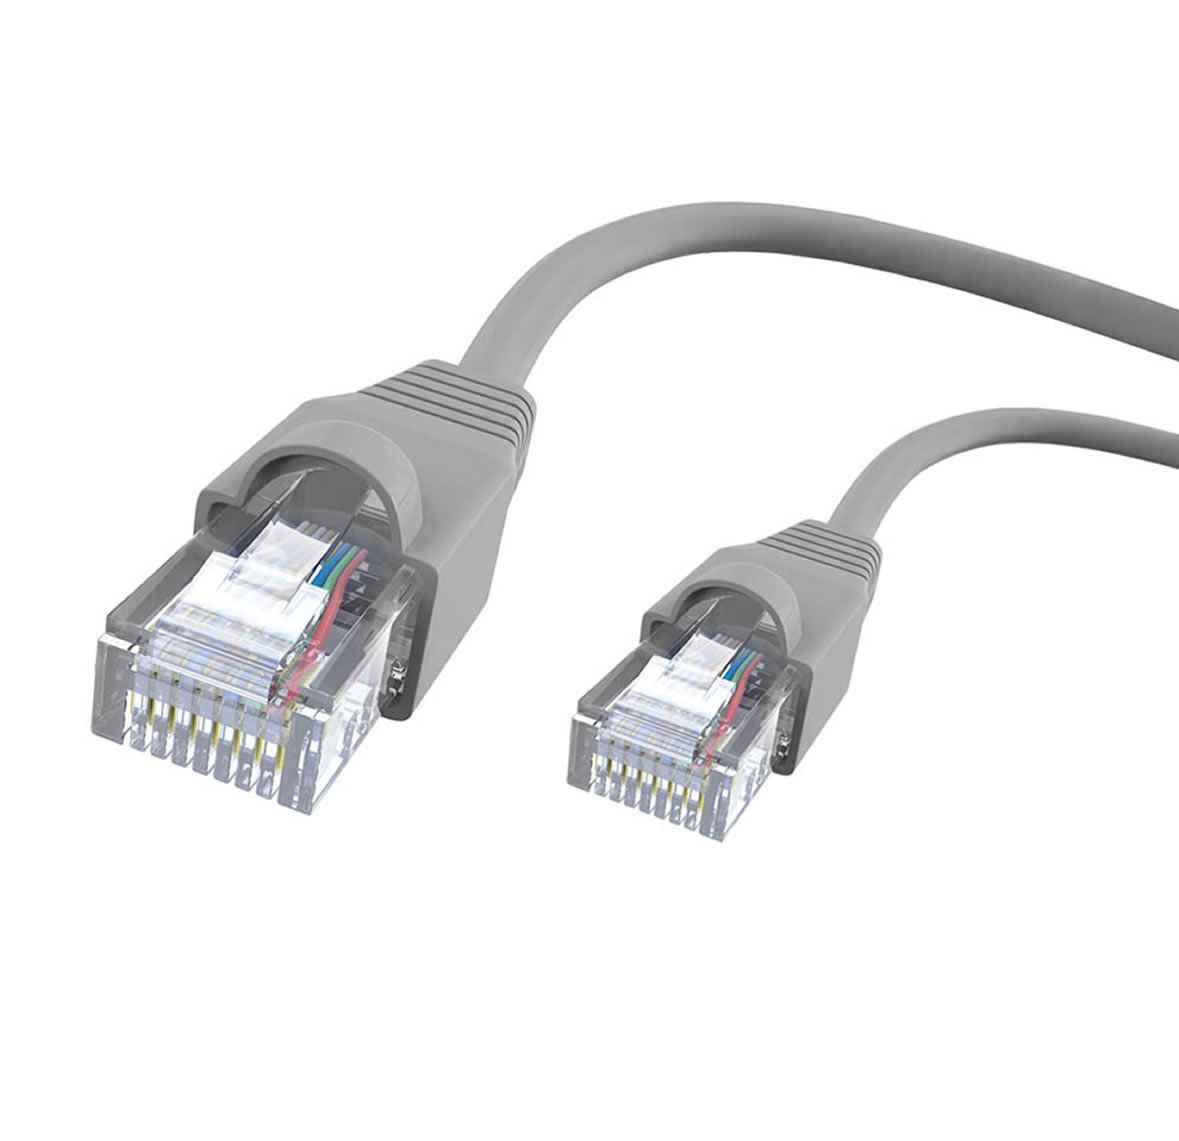 NT262 Cat6 Ethernet Network Patch 2.0m Cable